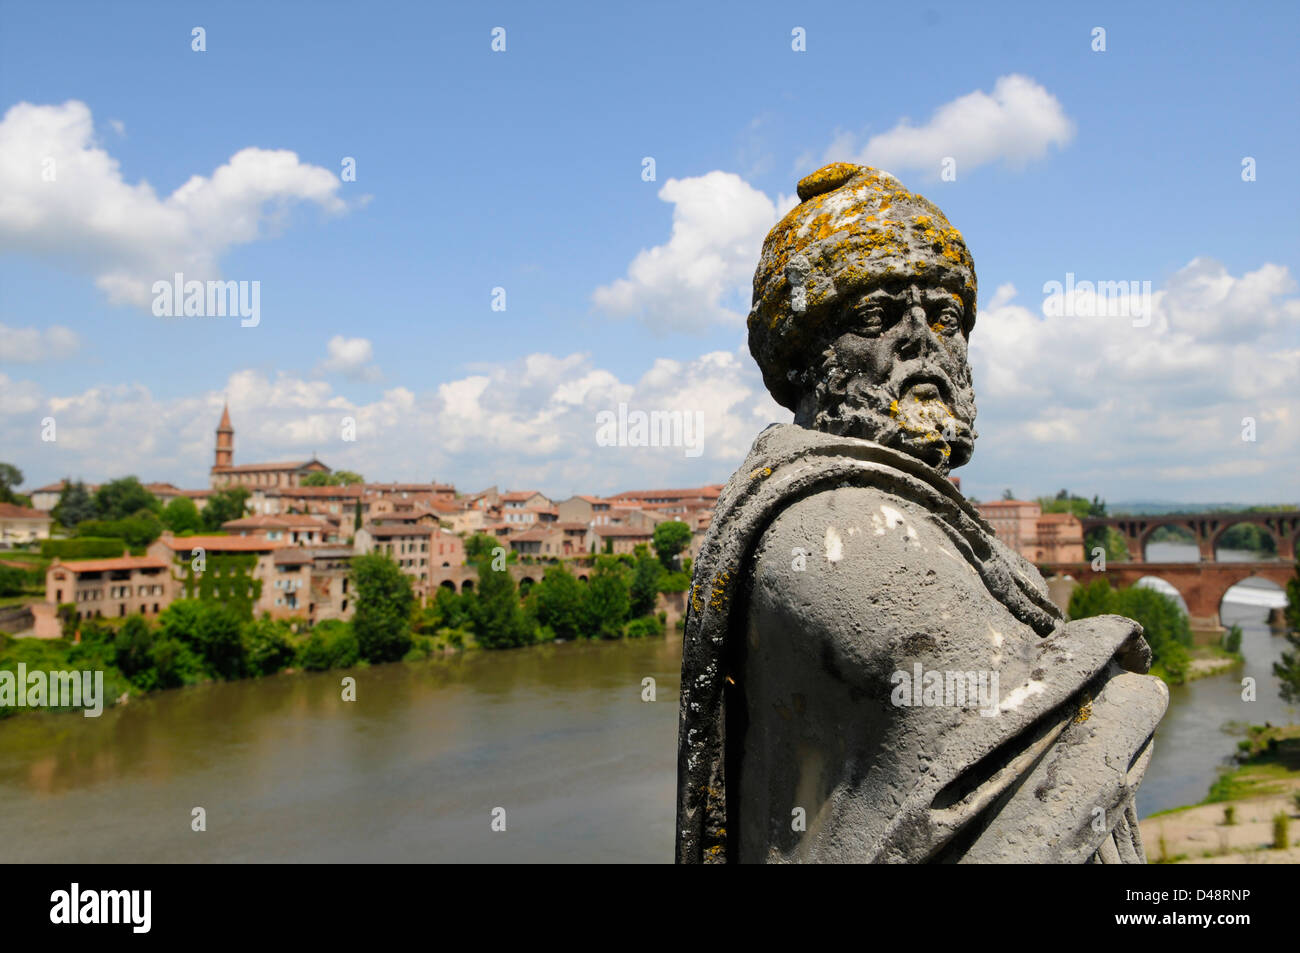 Statue in the gardens in the Palais de la Berbie (Berber's Palace) looking over the River Tarn. Albi, Tarn, France Stock Photo